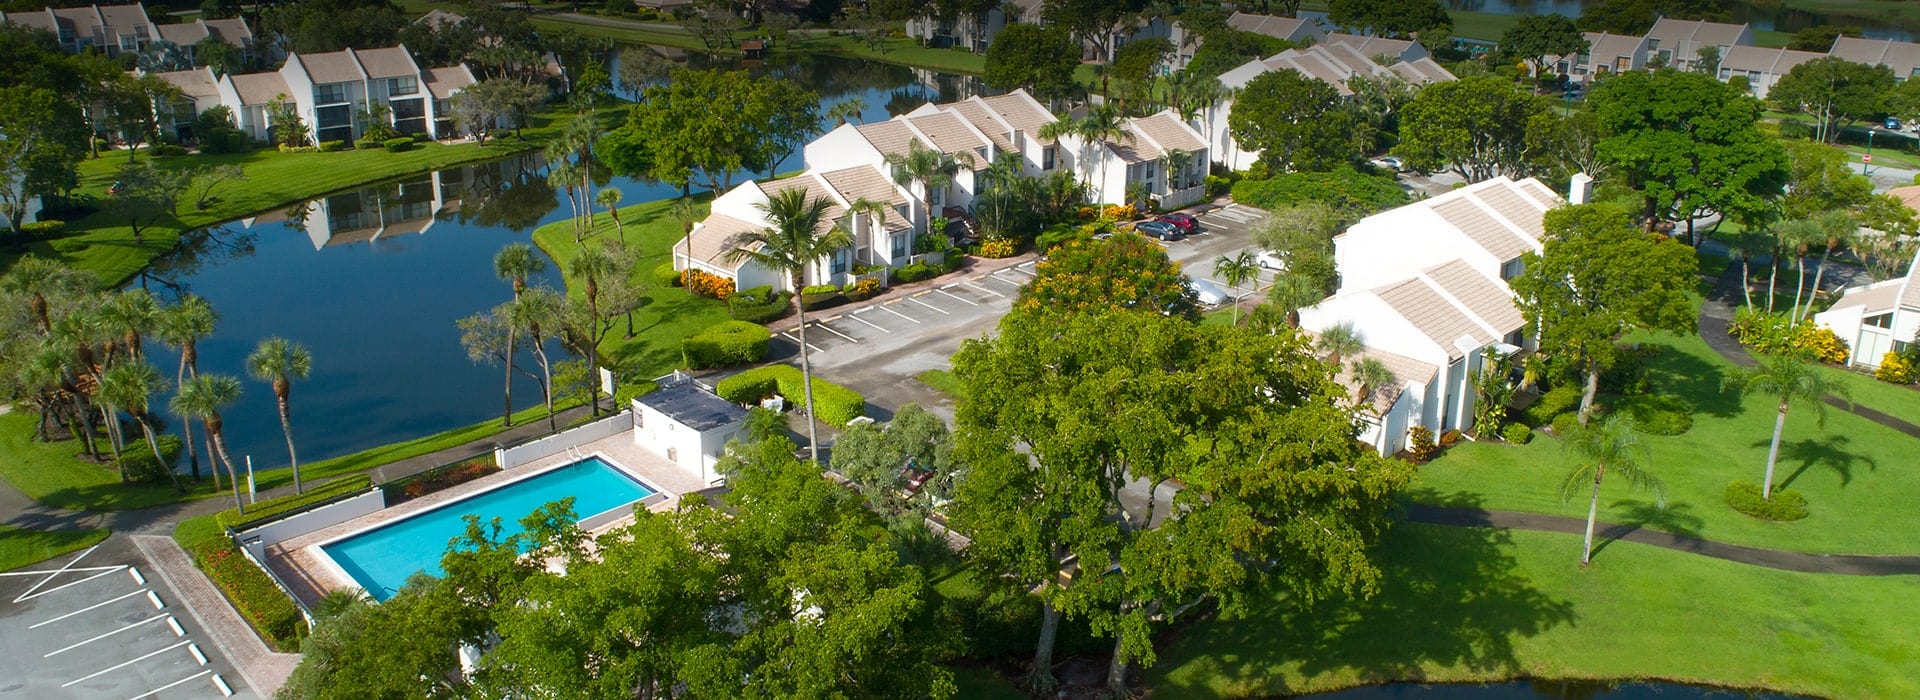 Bridgewood in Boca West with a combination of villas, townhomes and mid rise units with golf course and water views